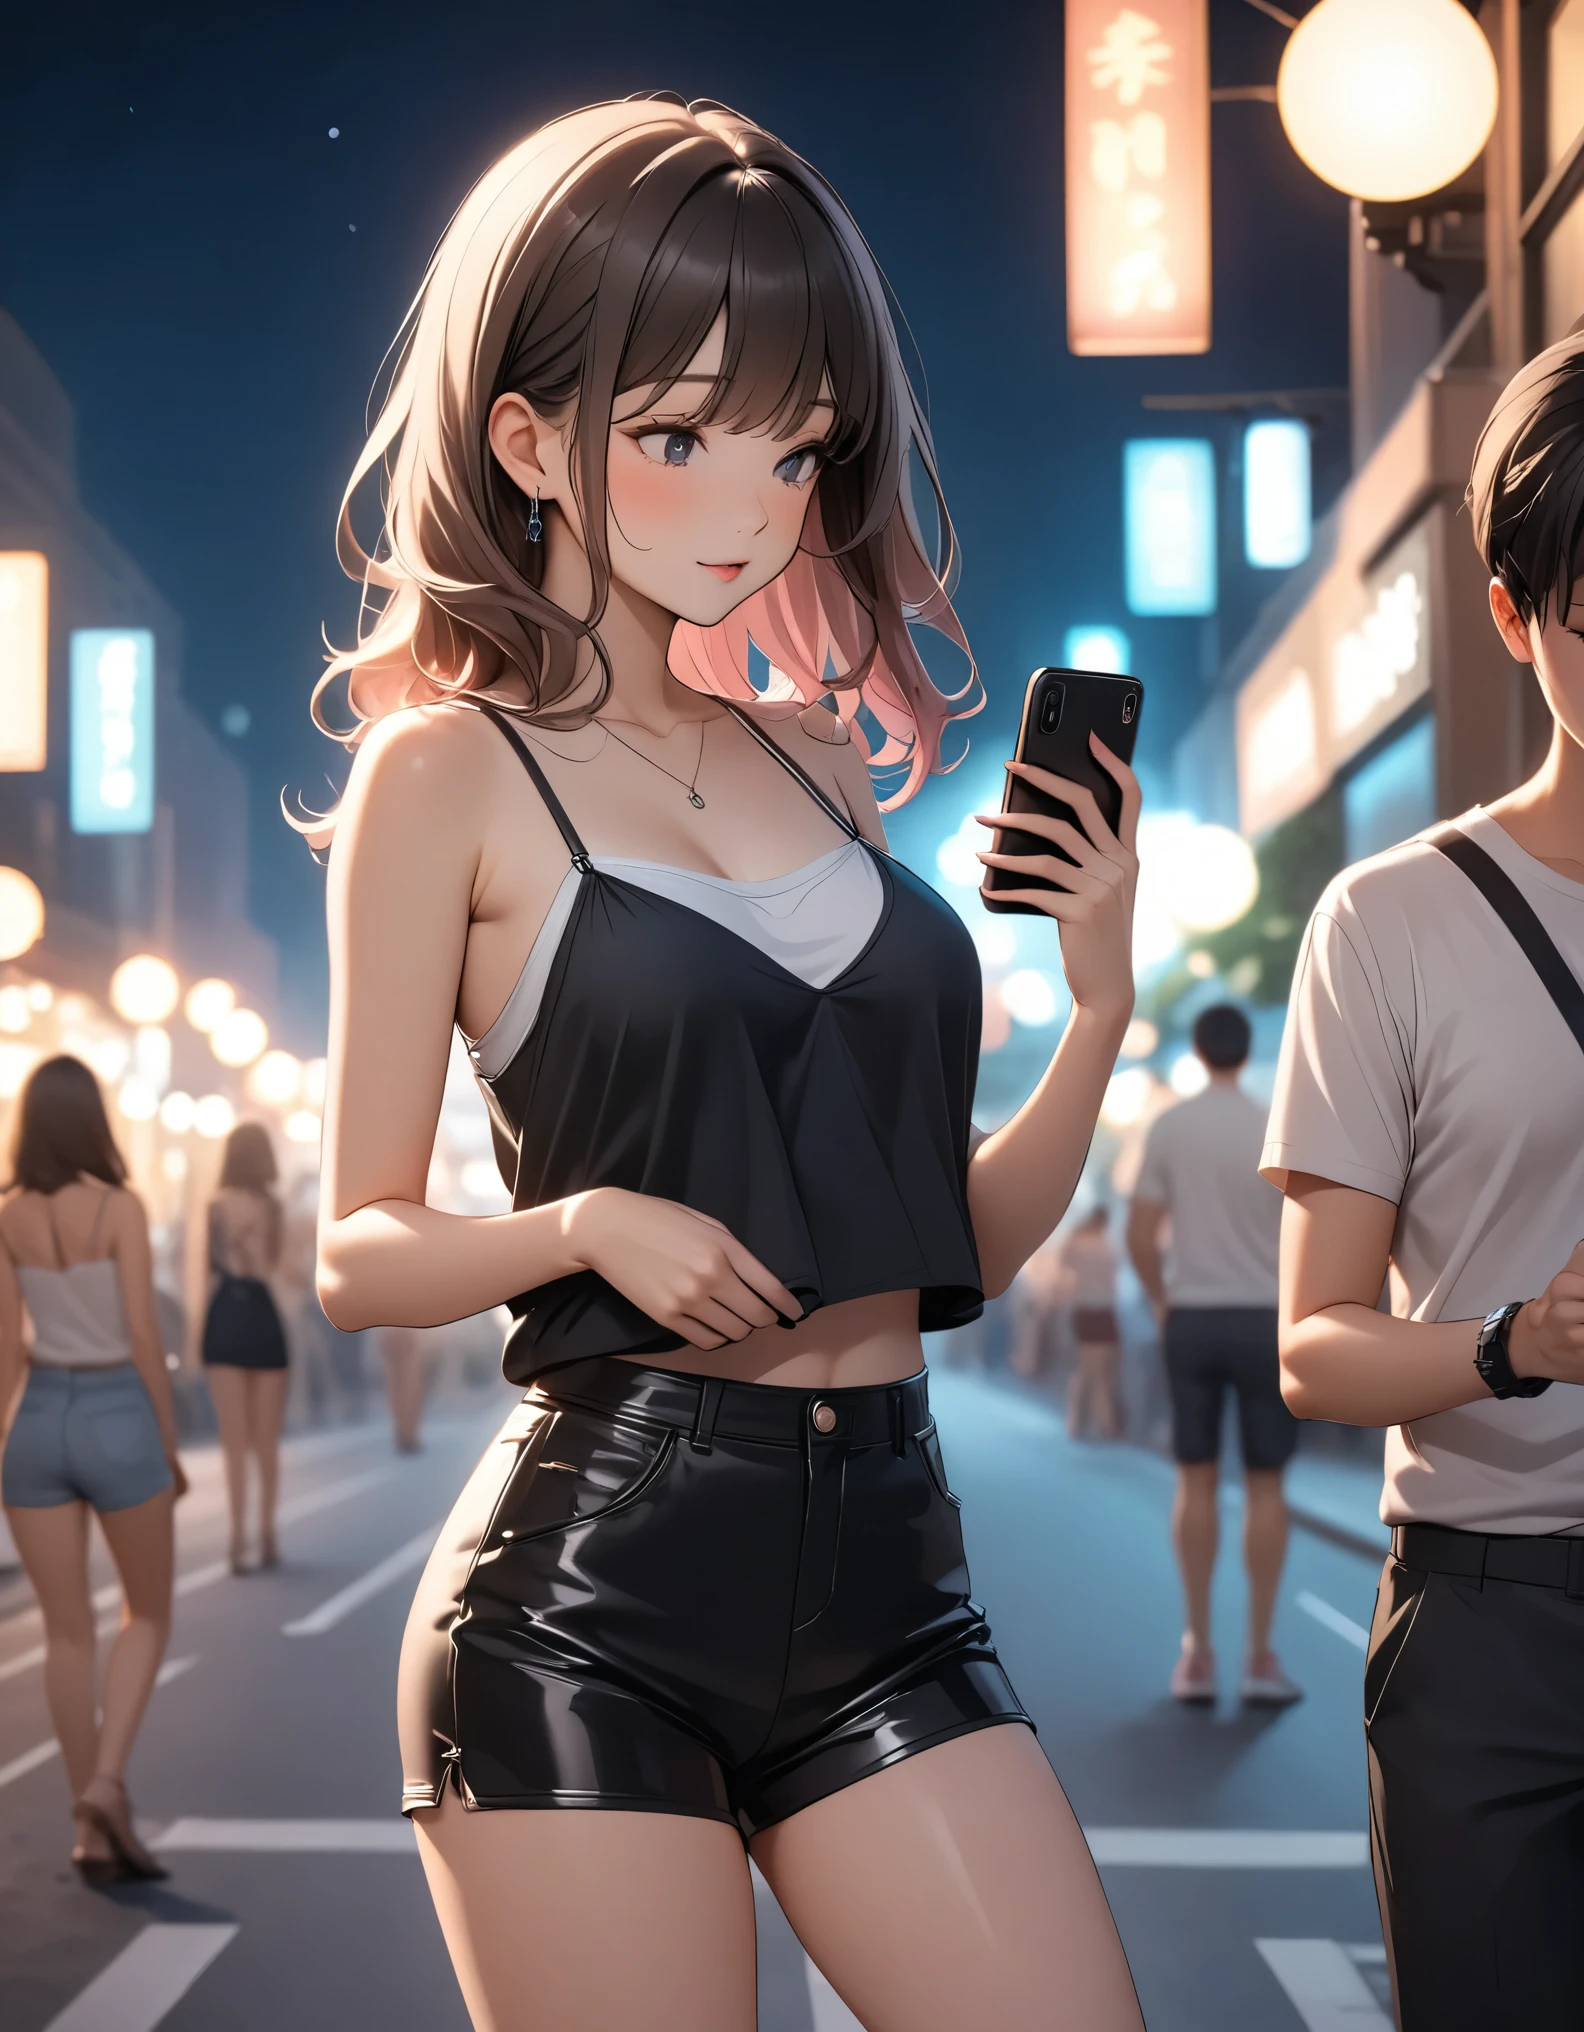 Beautiful woman, street lights at night, Fiddling with smartphones, Hot Pants, black, pink, summer, feel hot, Passersby, night gradient, fine details, Subtle tones, There is a sense of tranquility in the picture. Bokeh, 